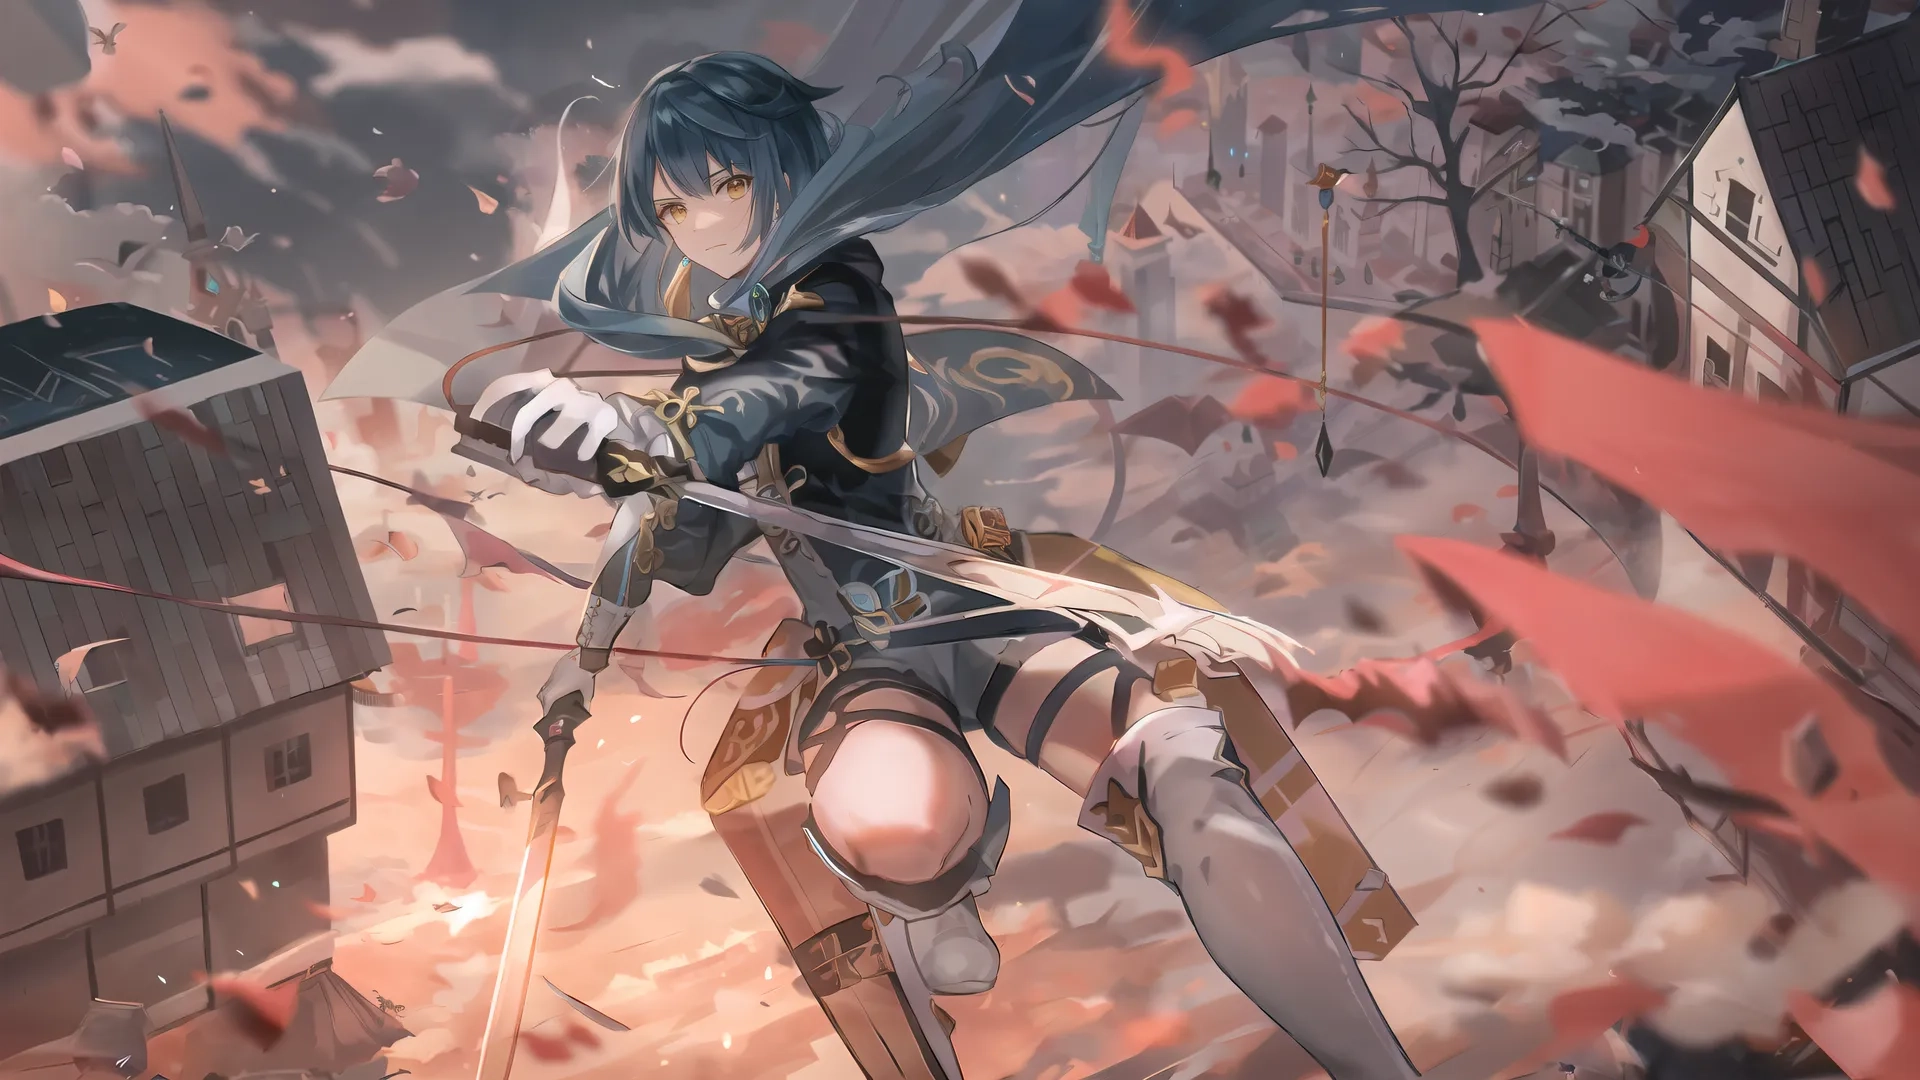 a picture of a person in action with a crossbow and sword near a cityscape area of smoke and trees with red leaves flying around
